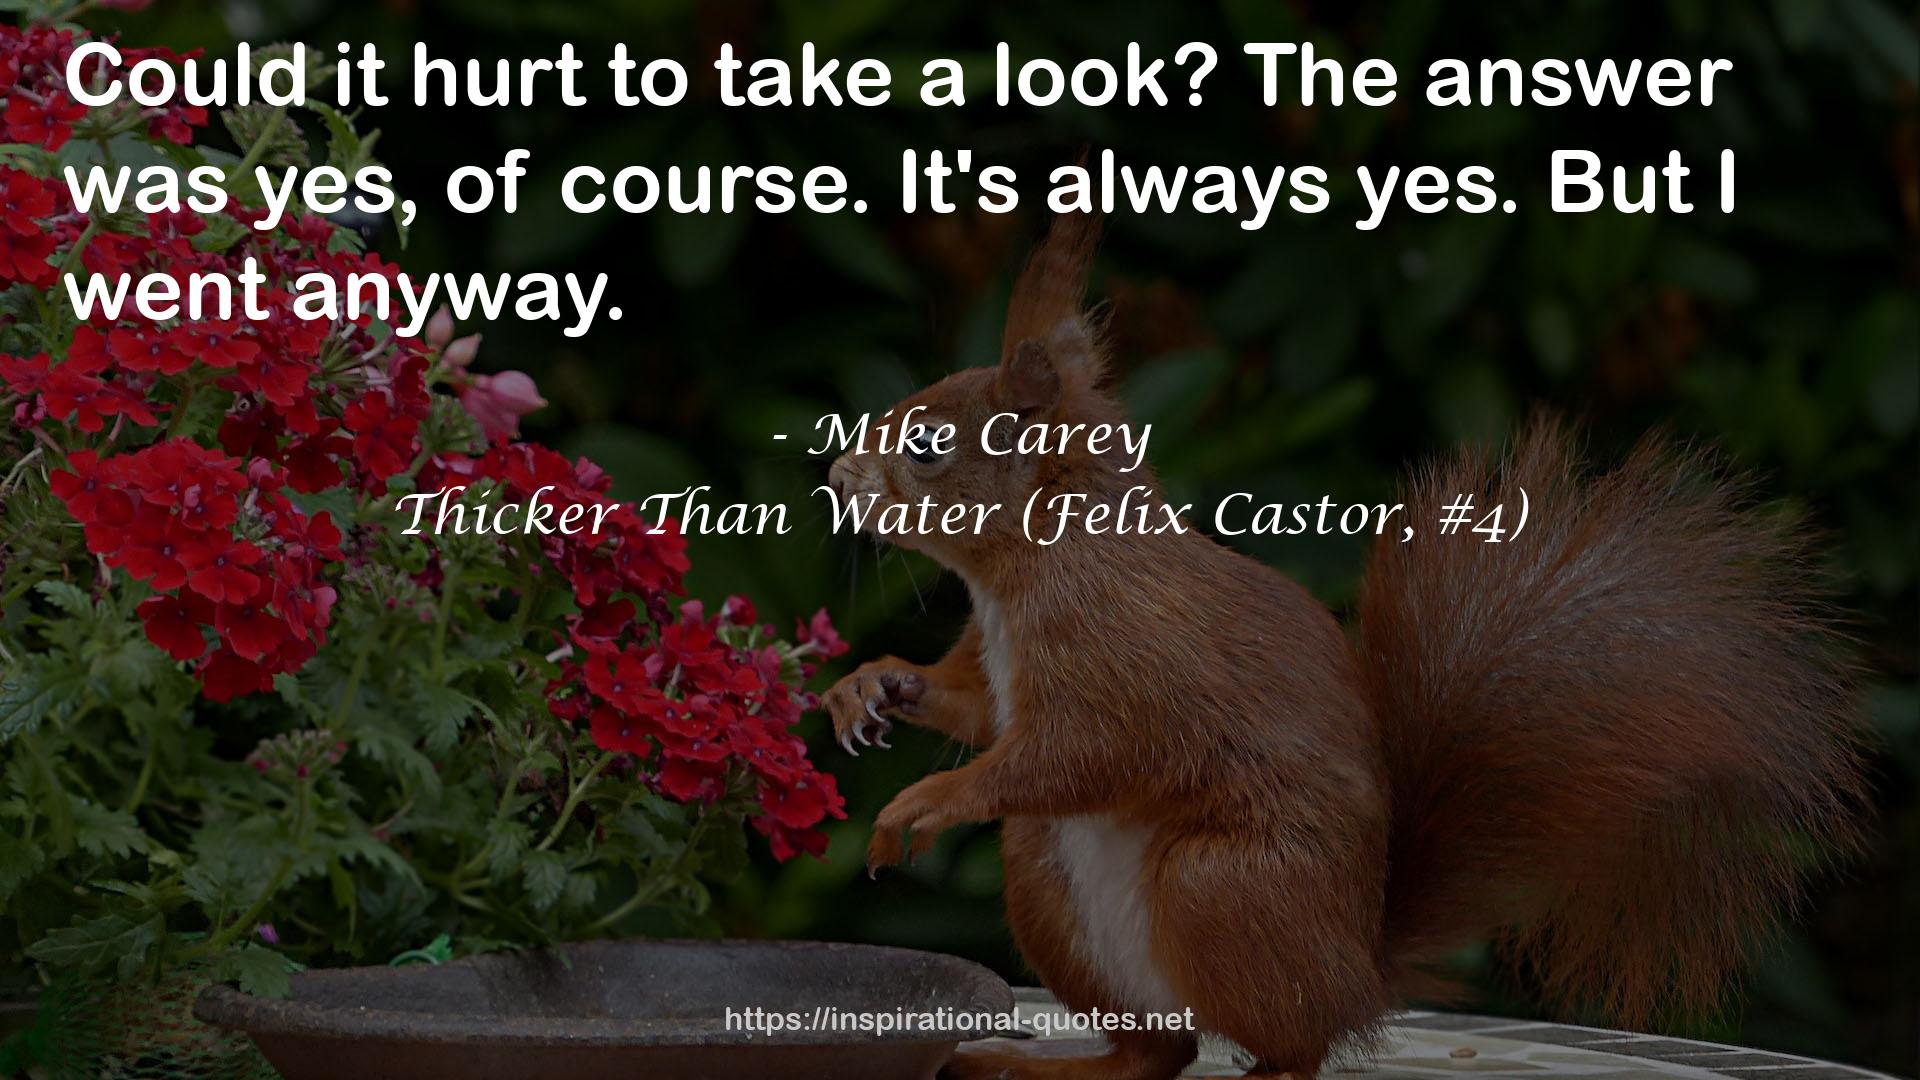 Thicker Than Water (Felix Castor, #4) QUOTES